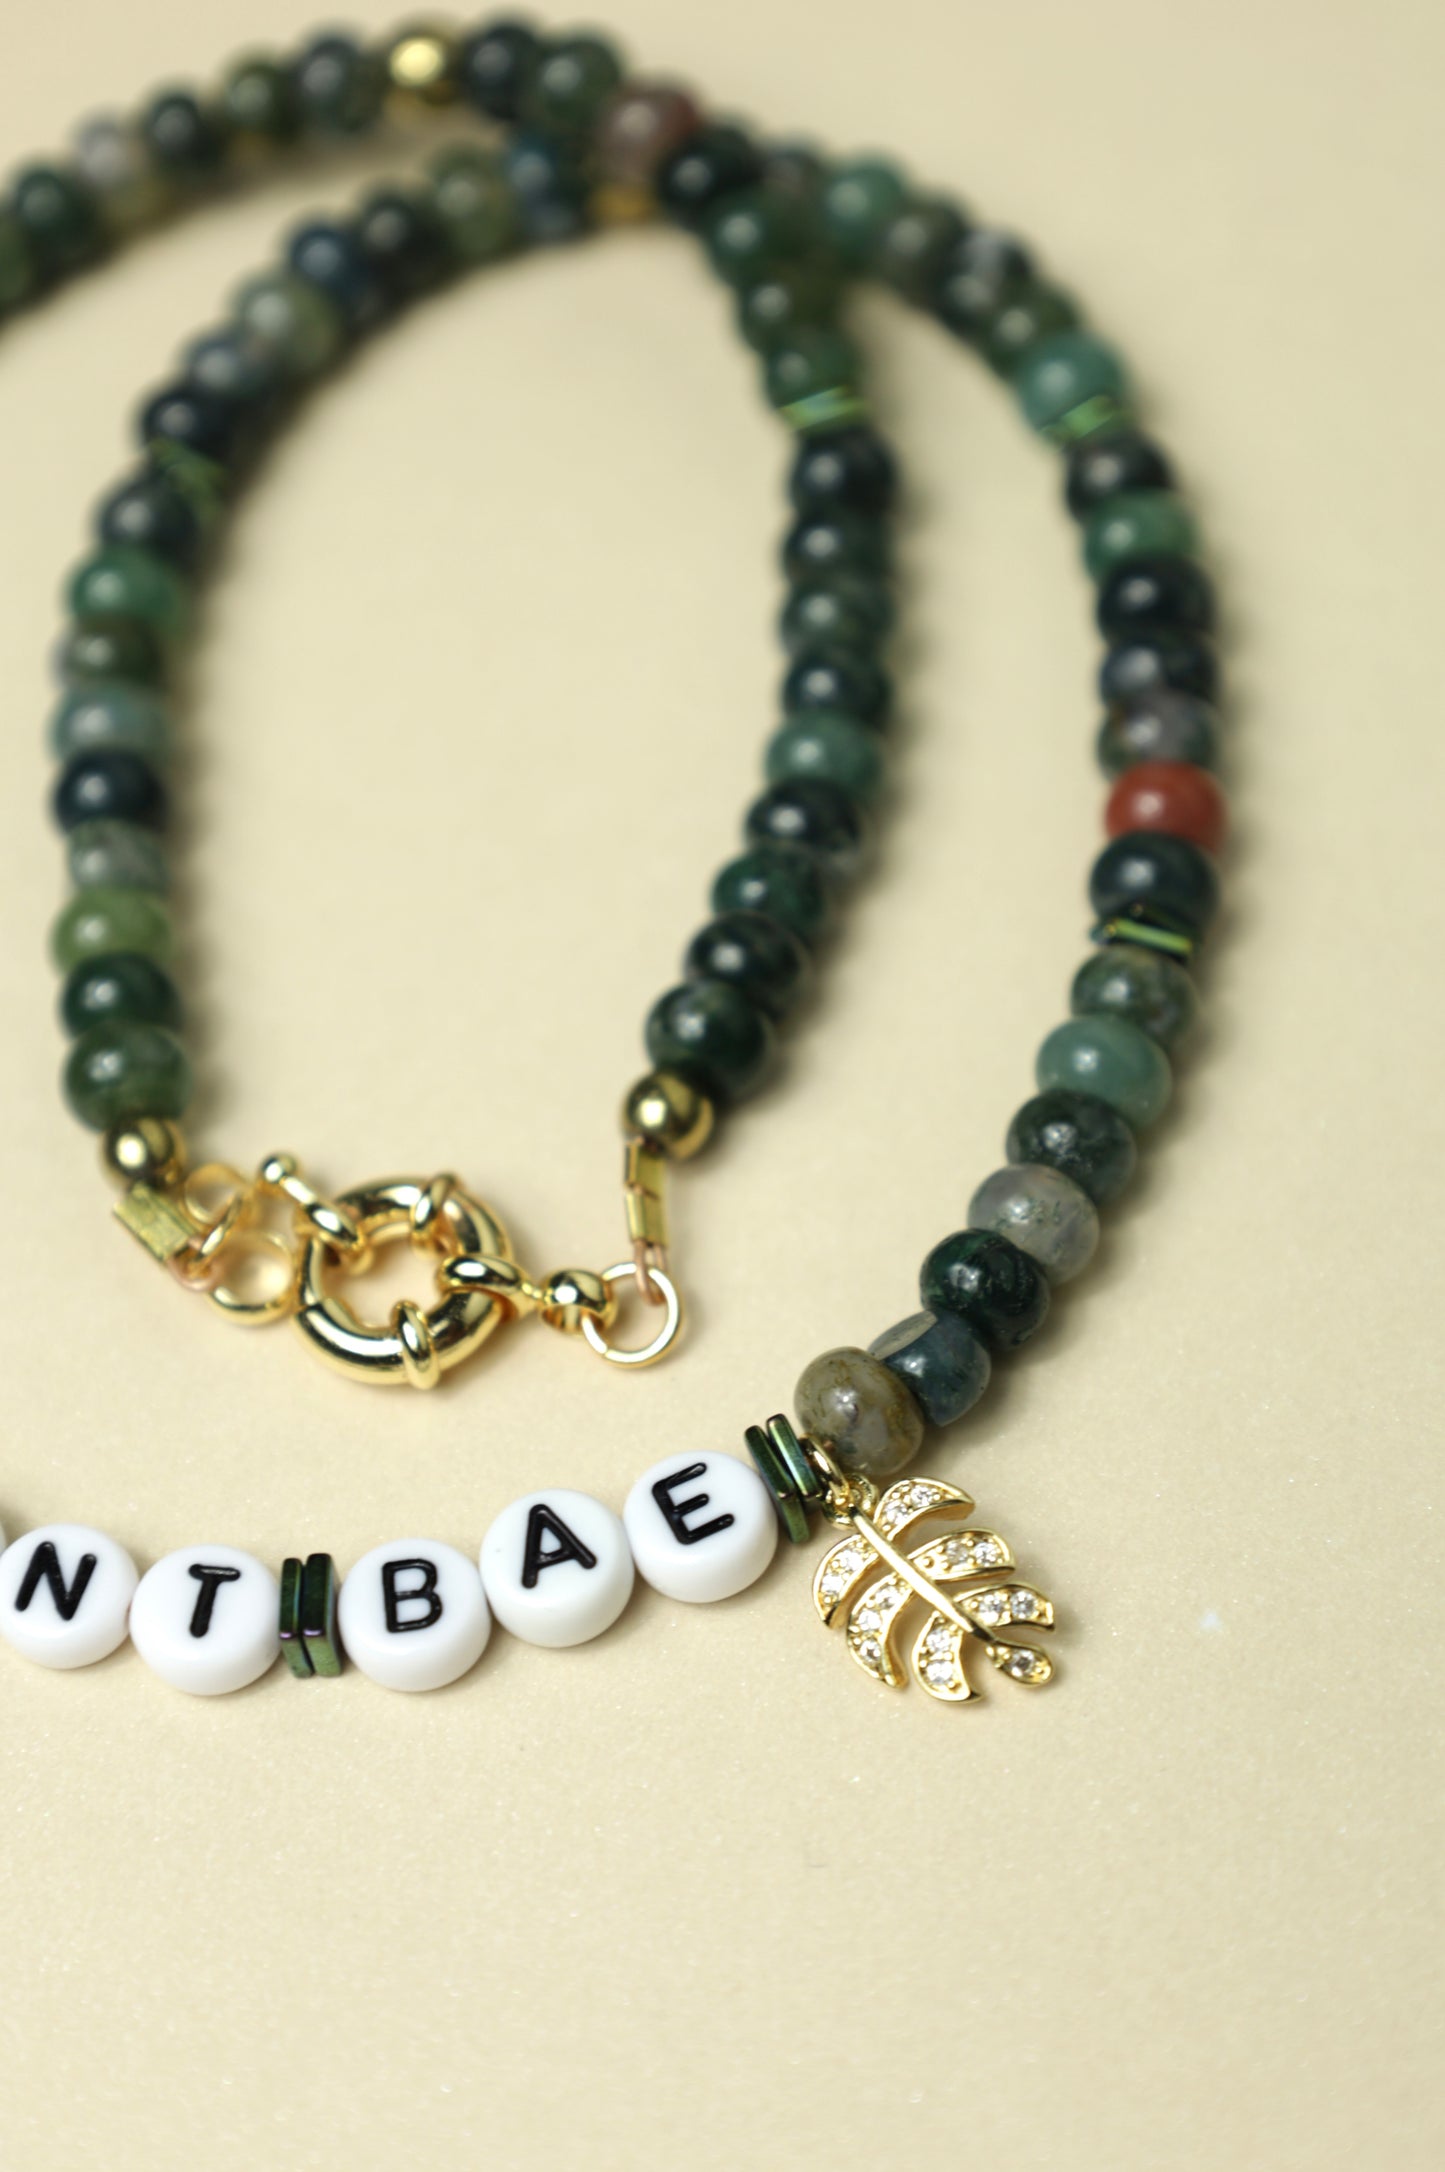 Plant Bae beaded Necklace